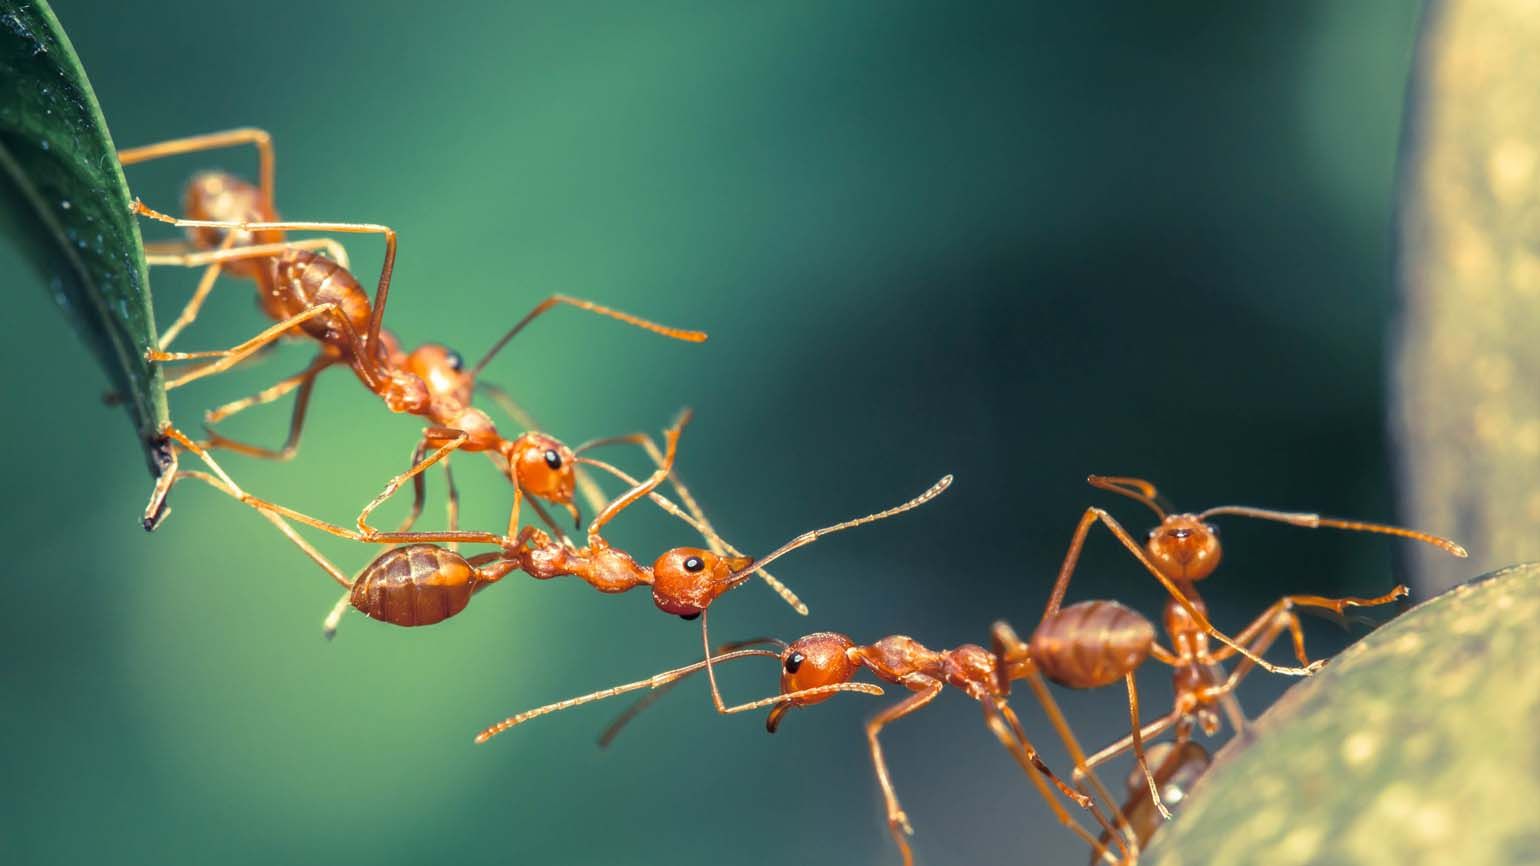 Ants working together; Getty Images